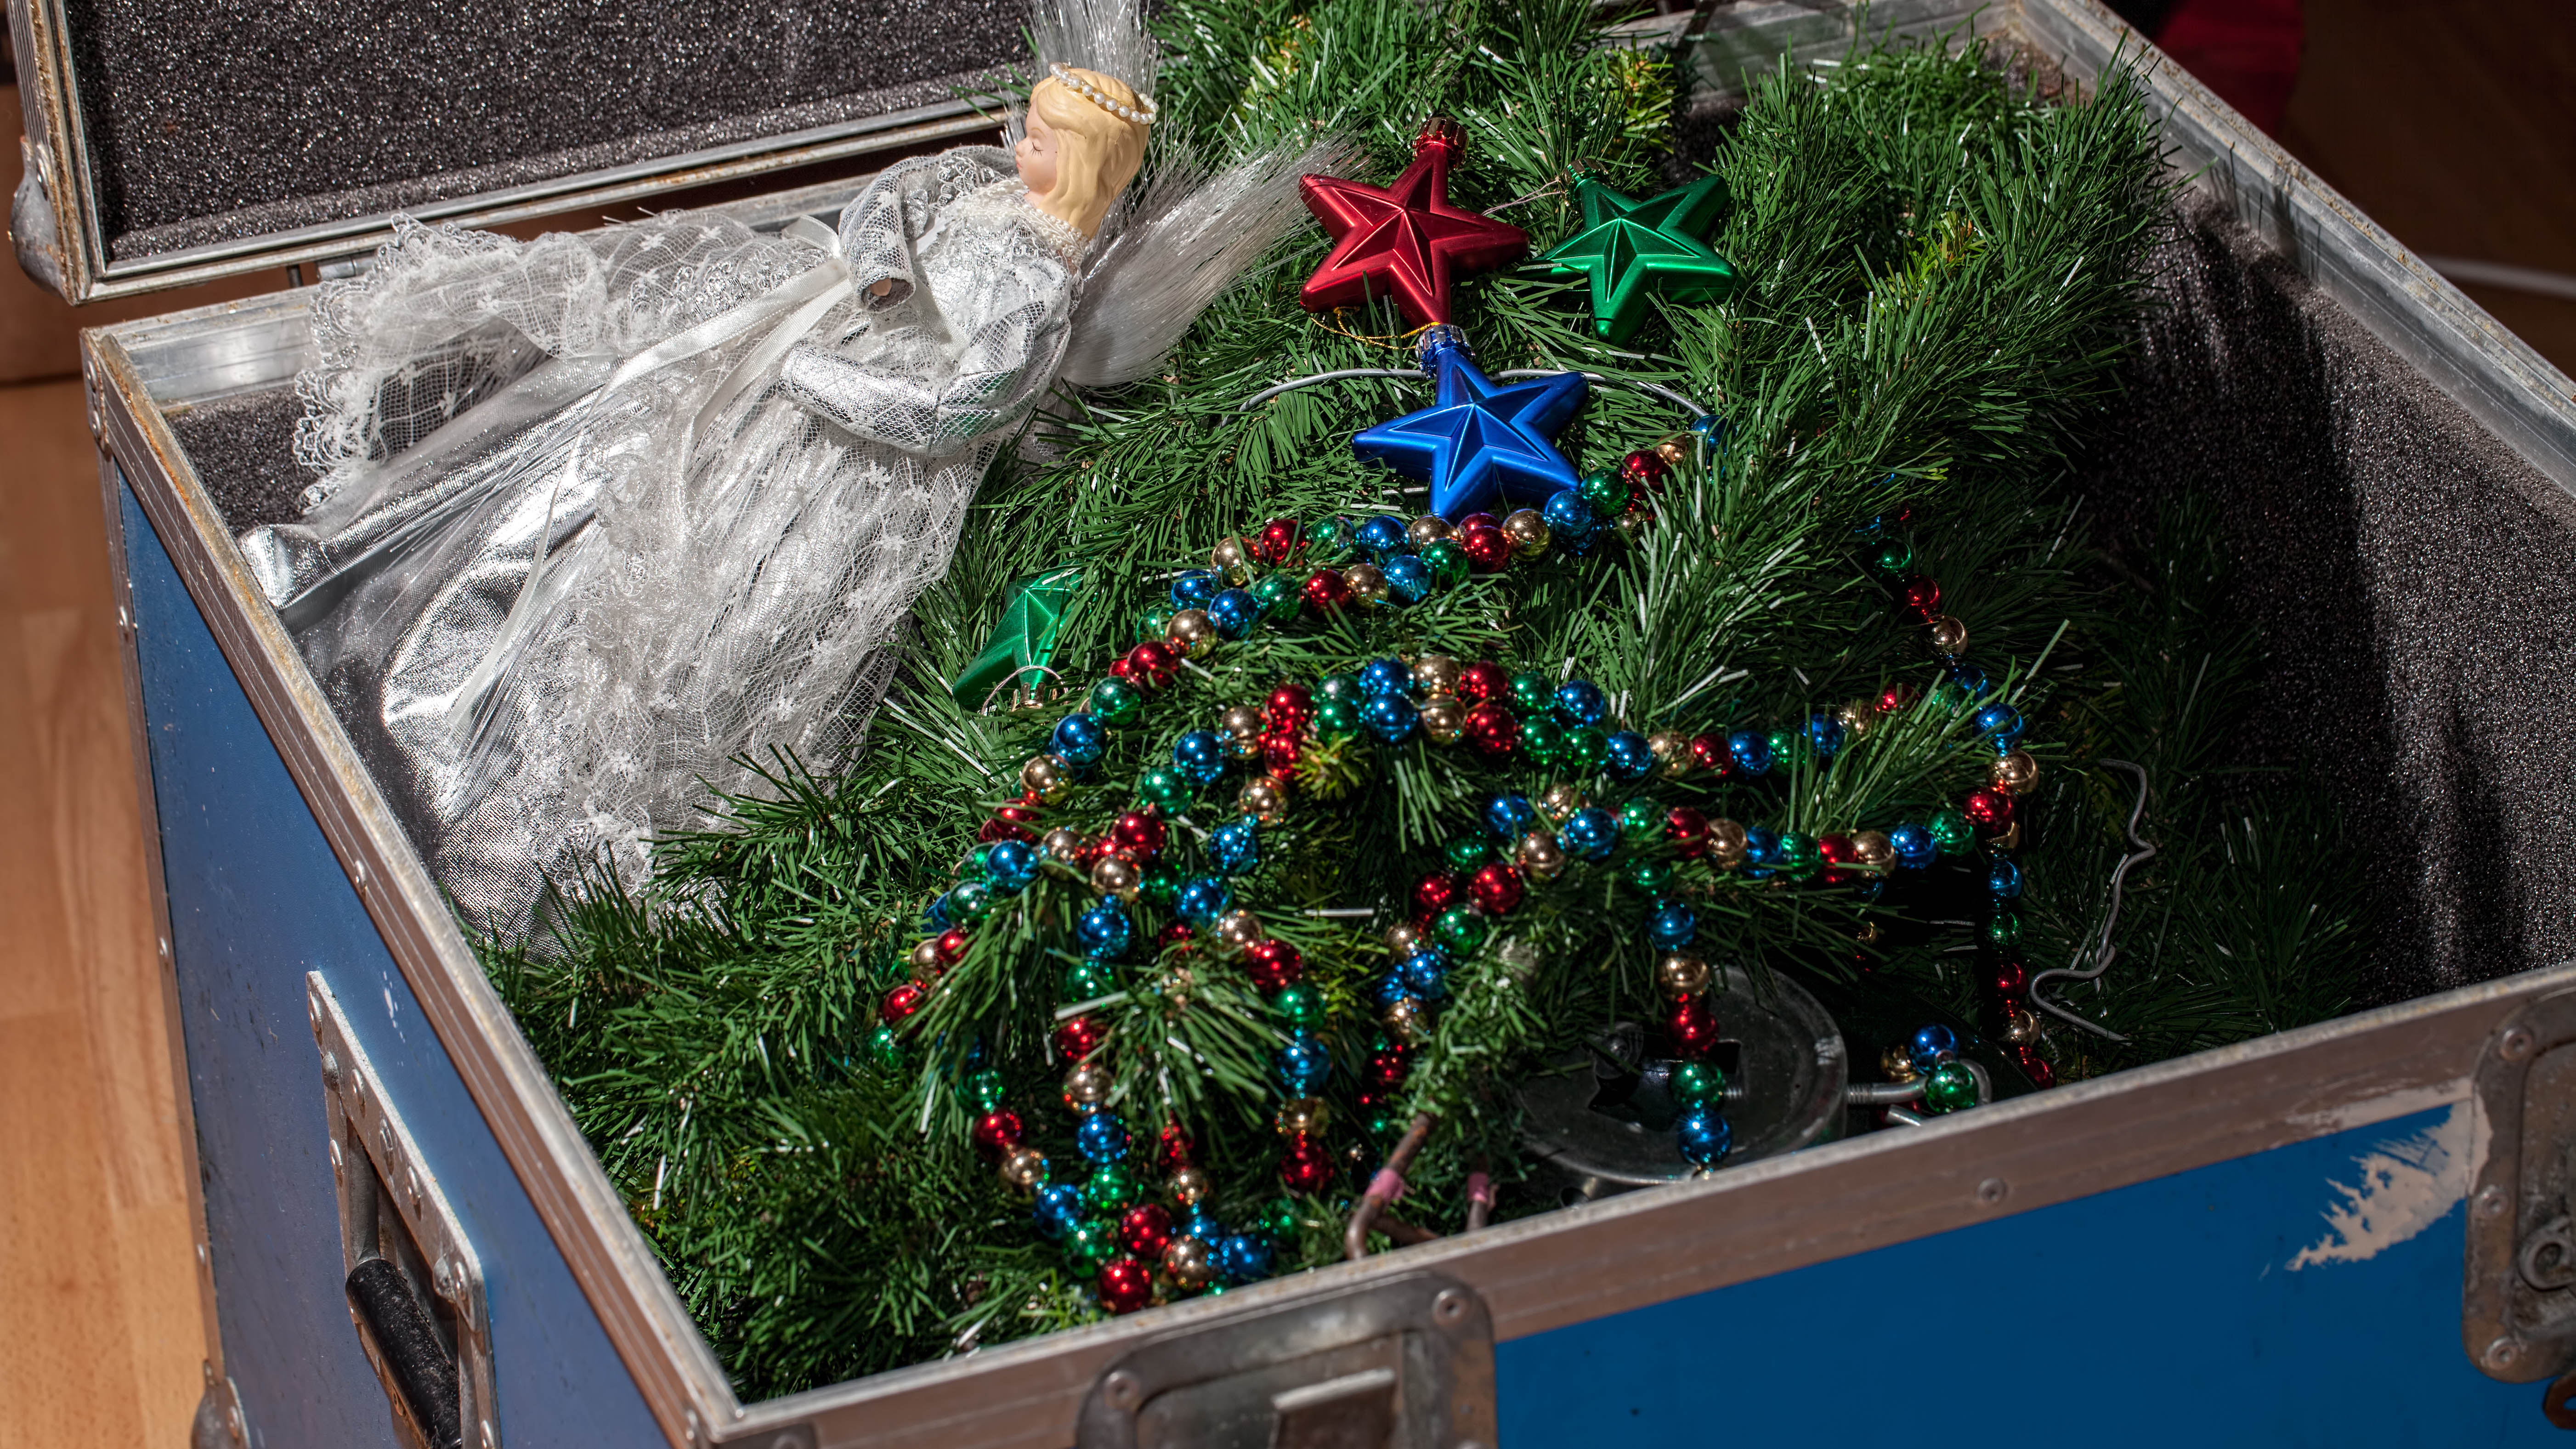 Christmas tree stored in a decorative box